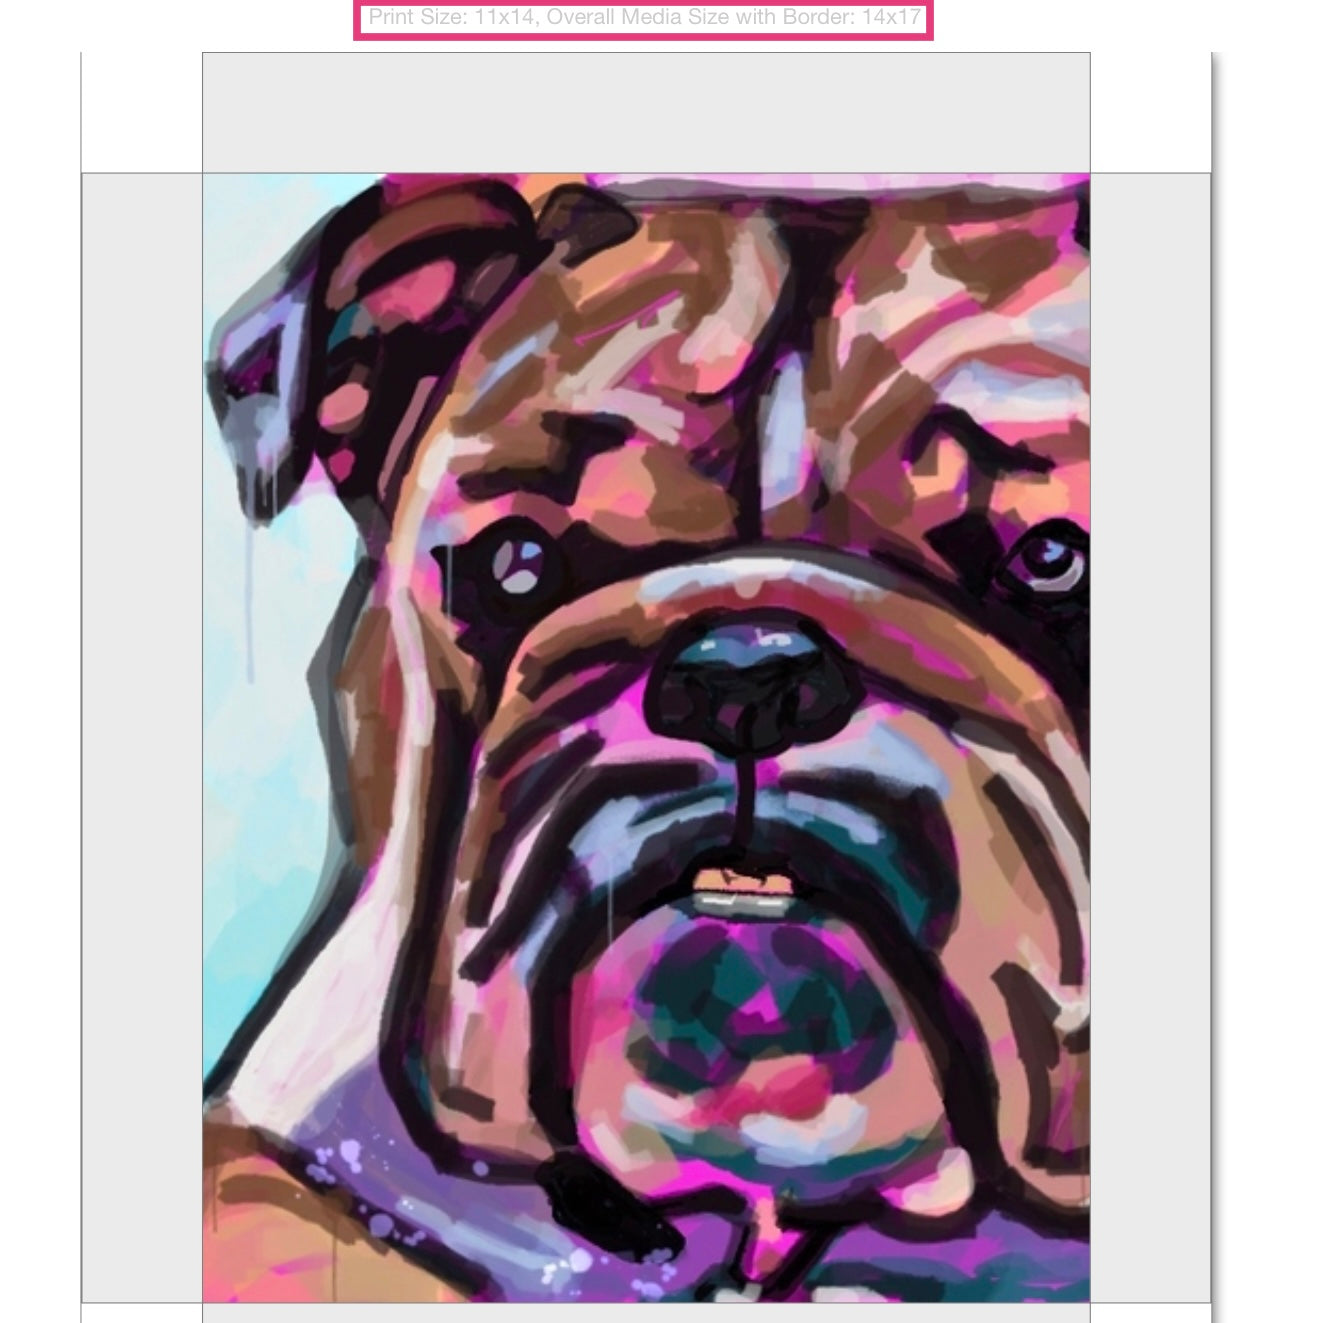 Bully Giclee on Gallery Wrapped Canvas